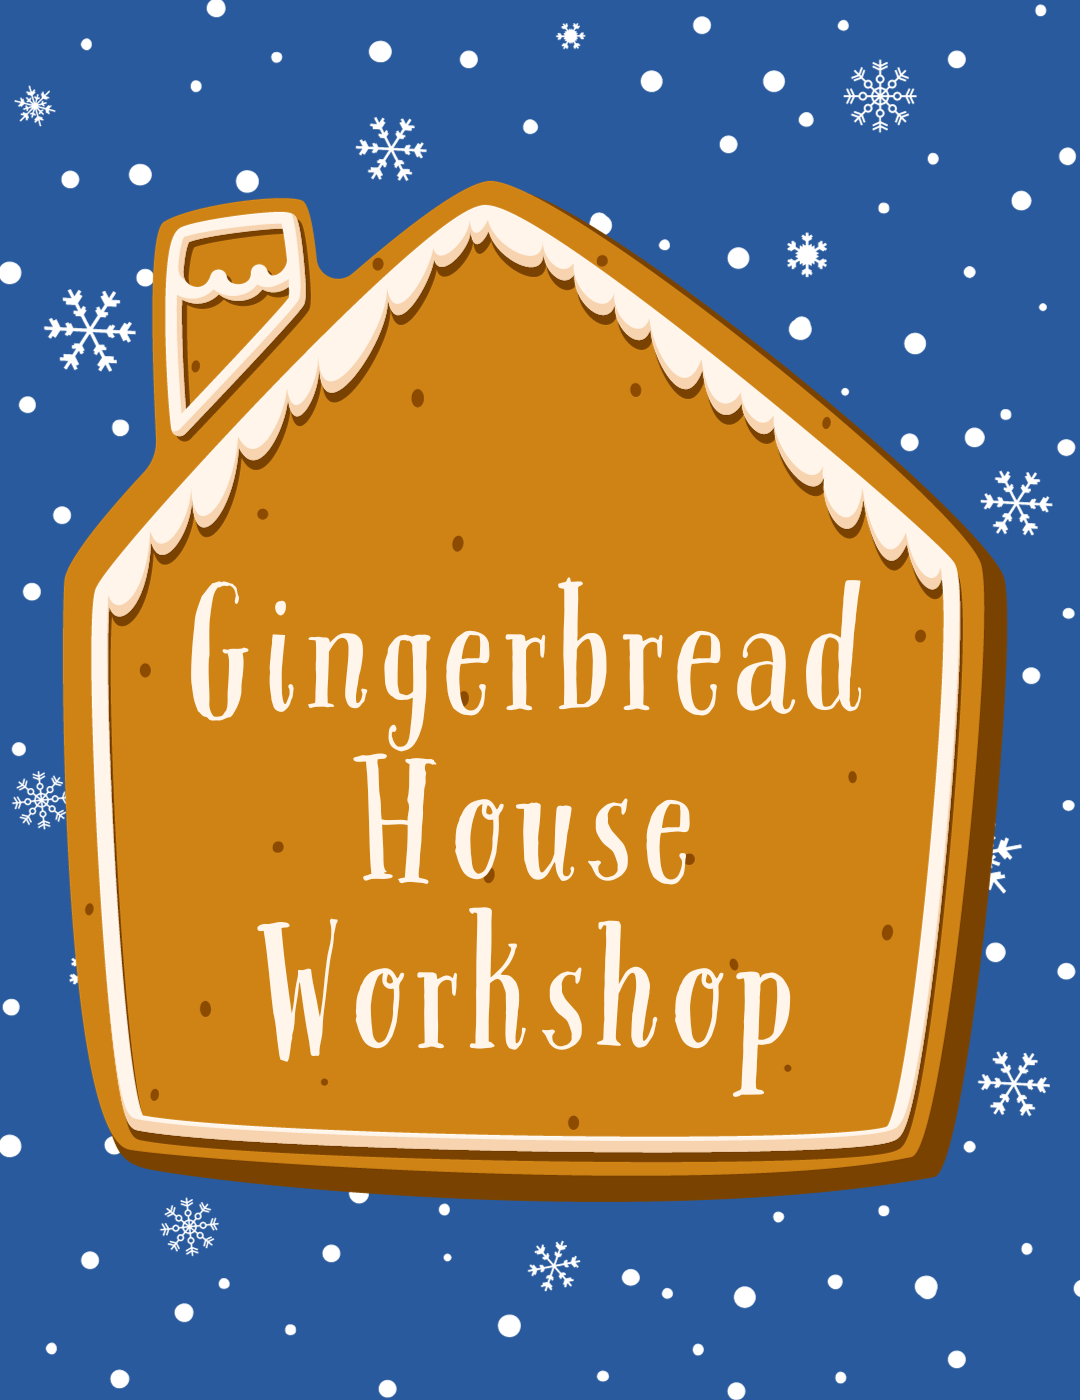 Gingerbread House Workshop (1080 x 1400 px)